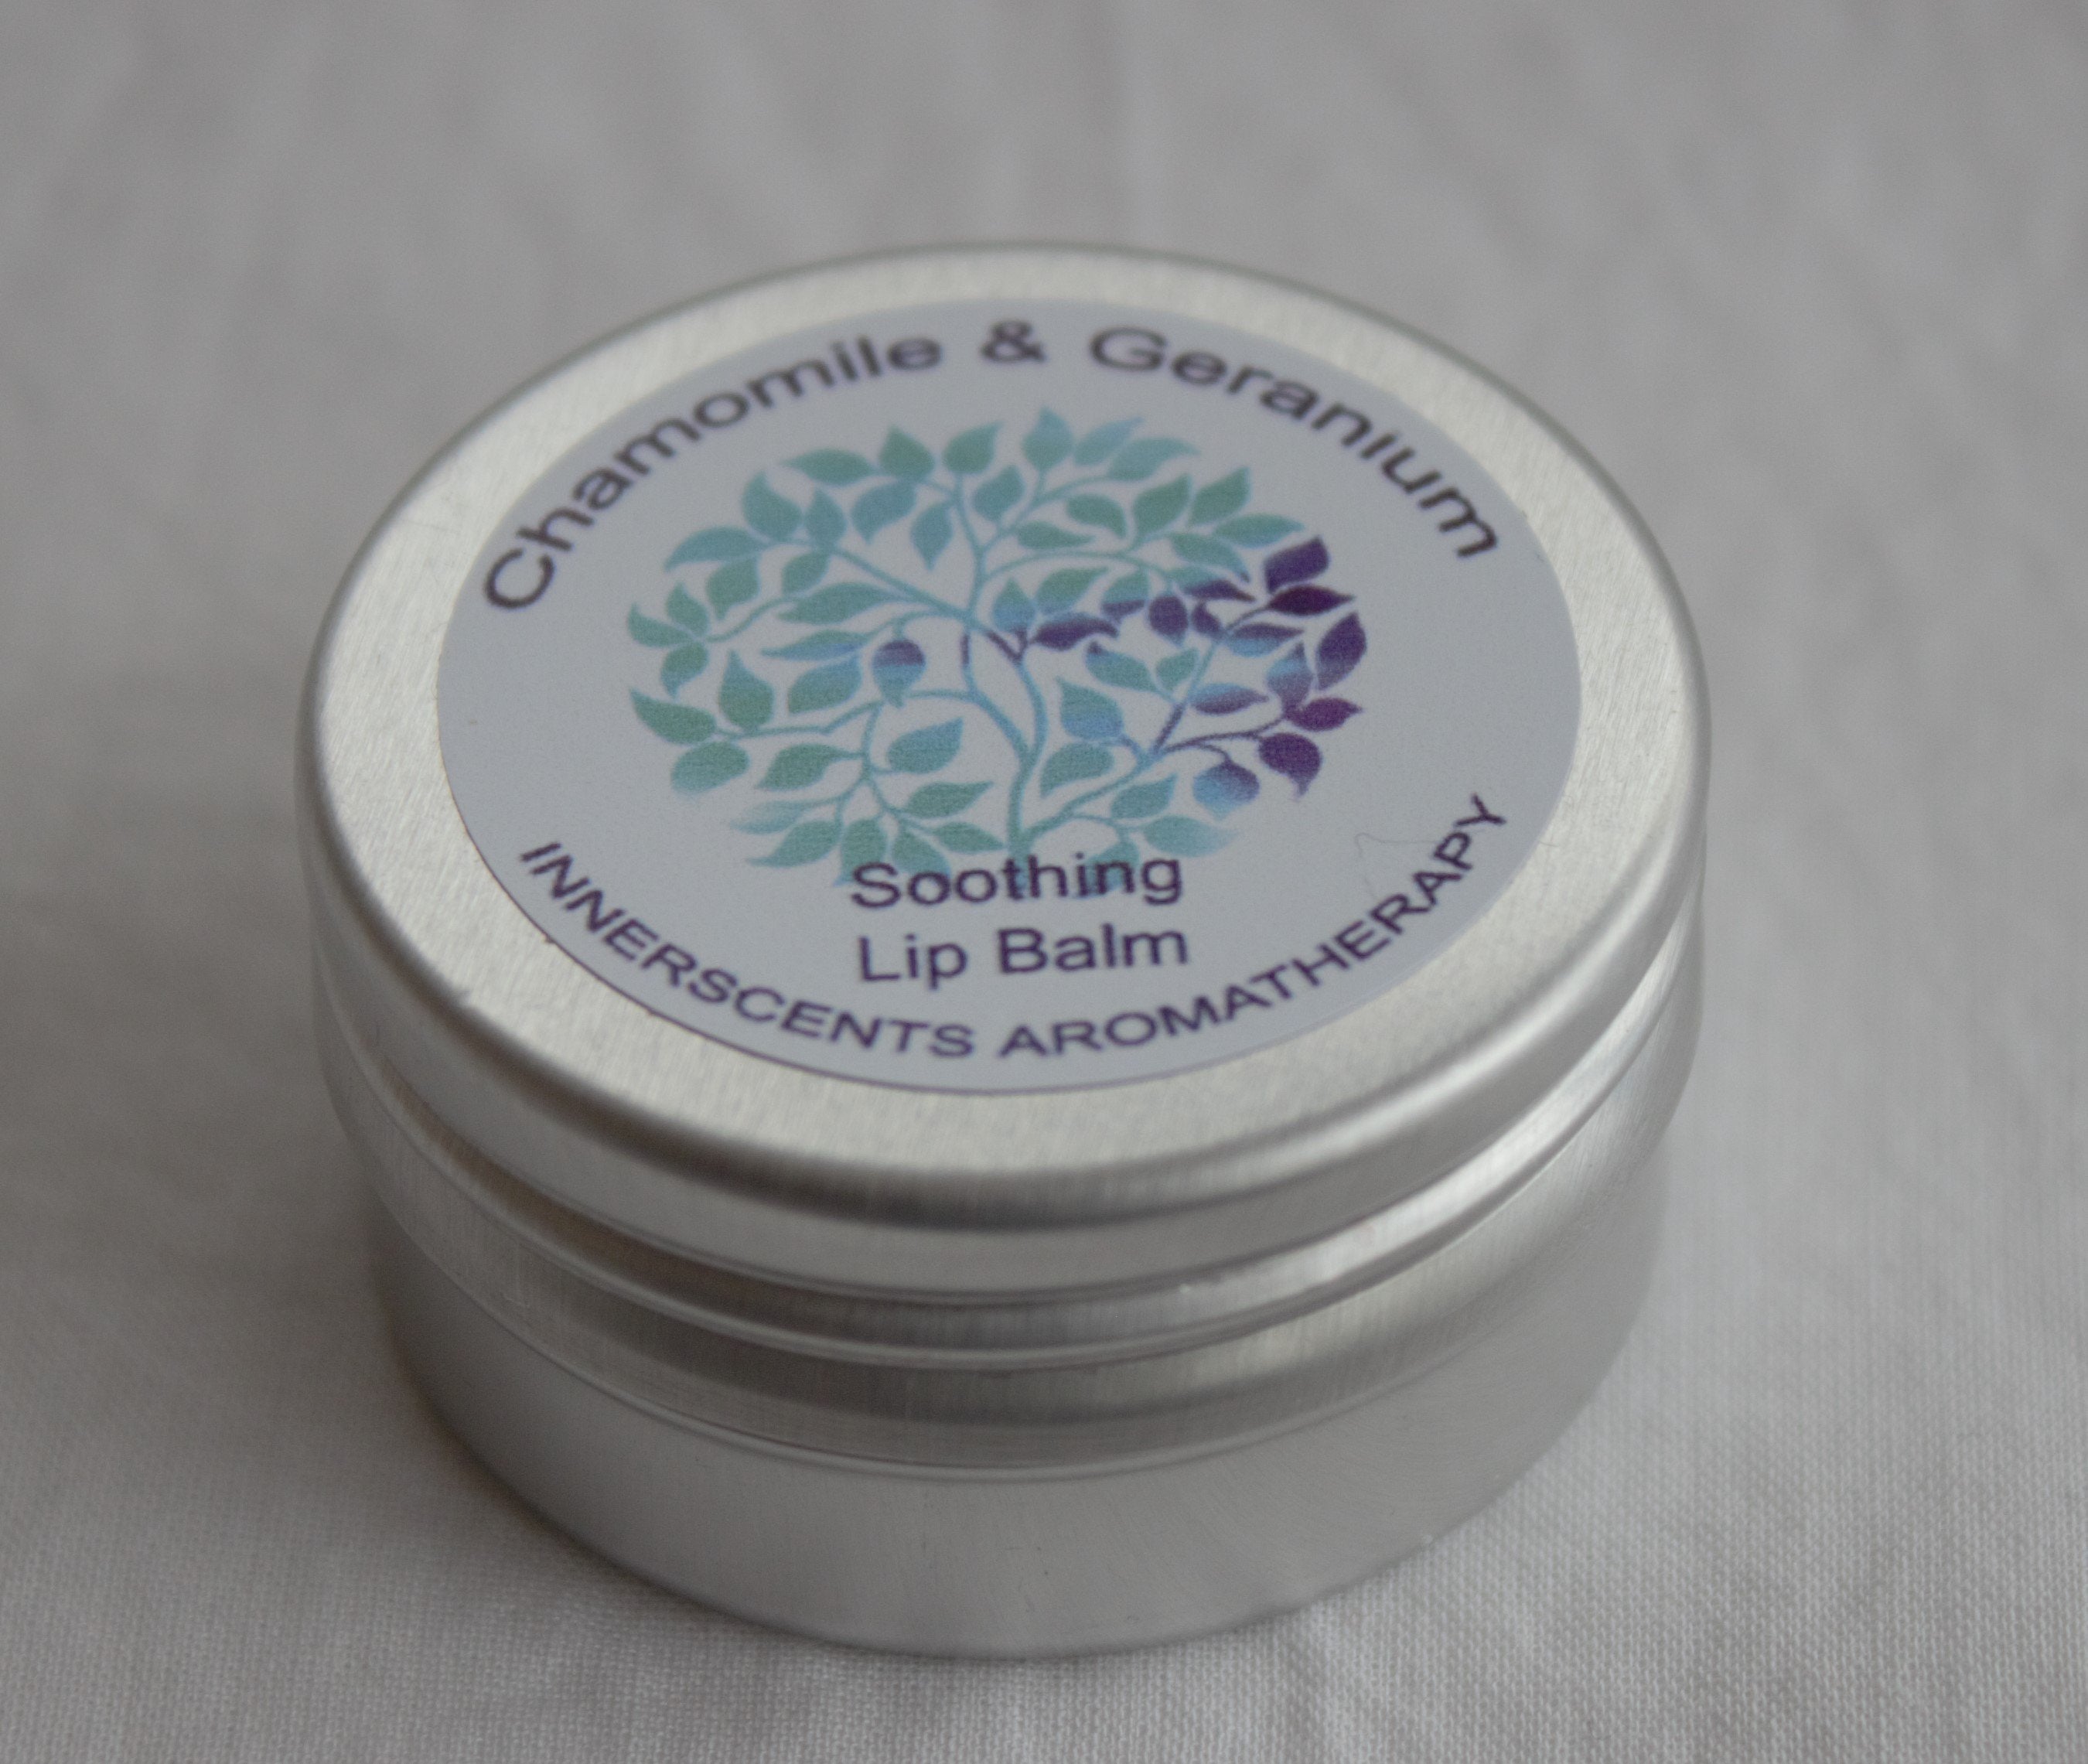 Lip Balm Soothing Chamomile and Geranium Luxury Aromatherapy - Innerscents Aromatherapy